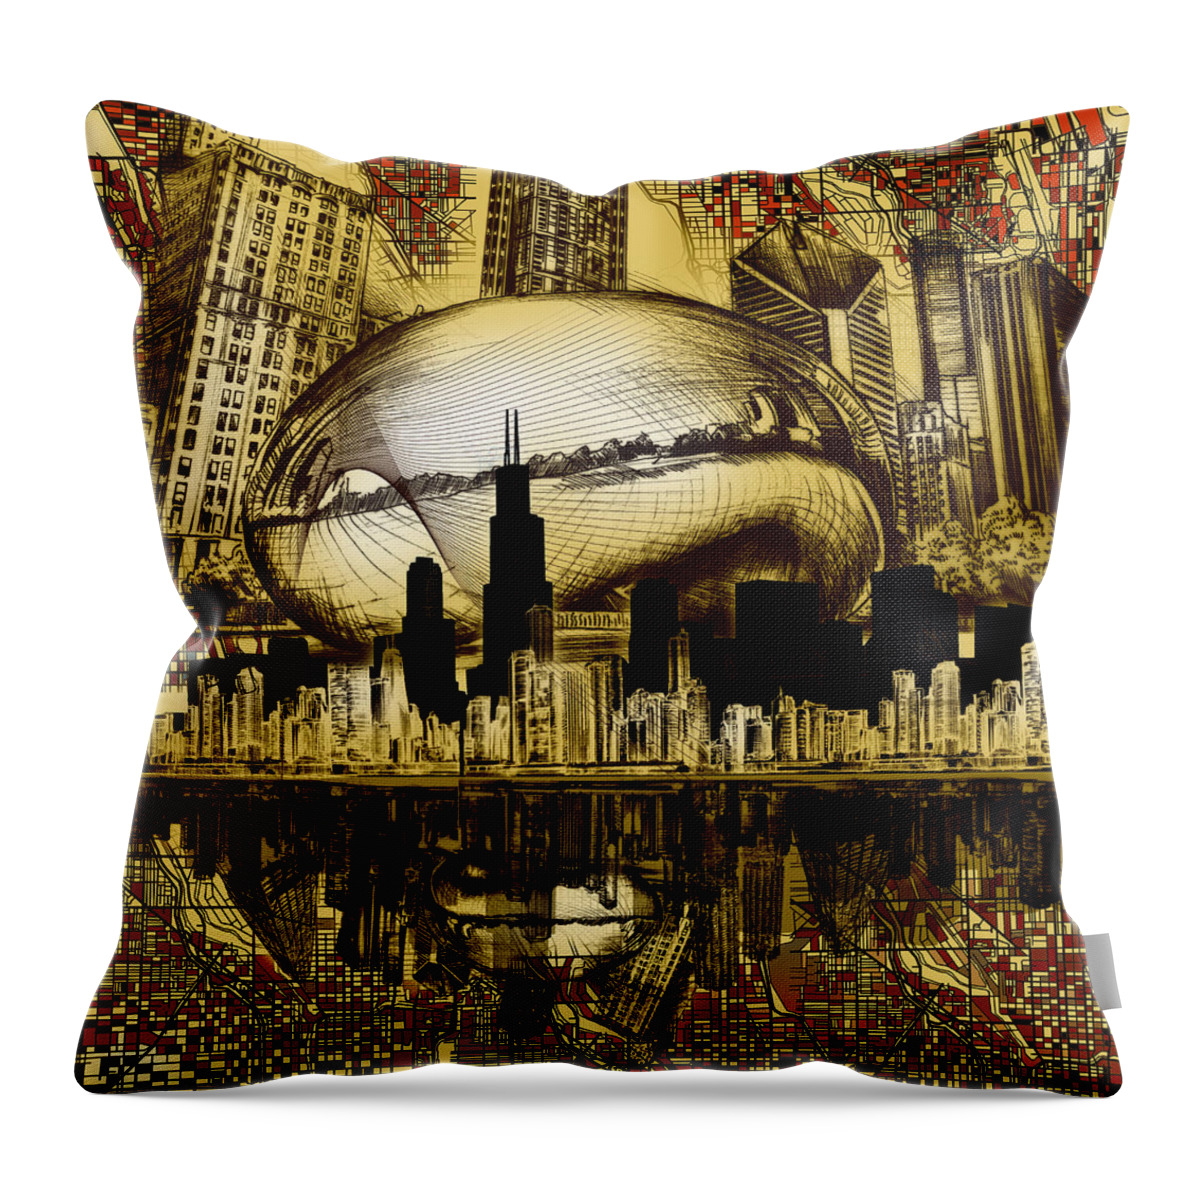 Chicago Skyline Throw Pillow featuring the digital art Chicago Skyline Drawing Collage 3 by Bekim M